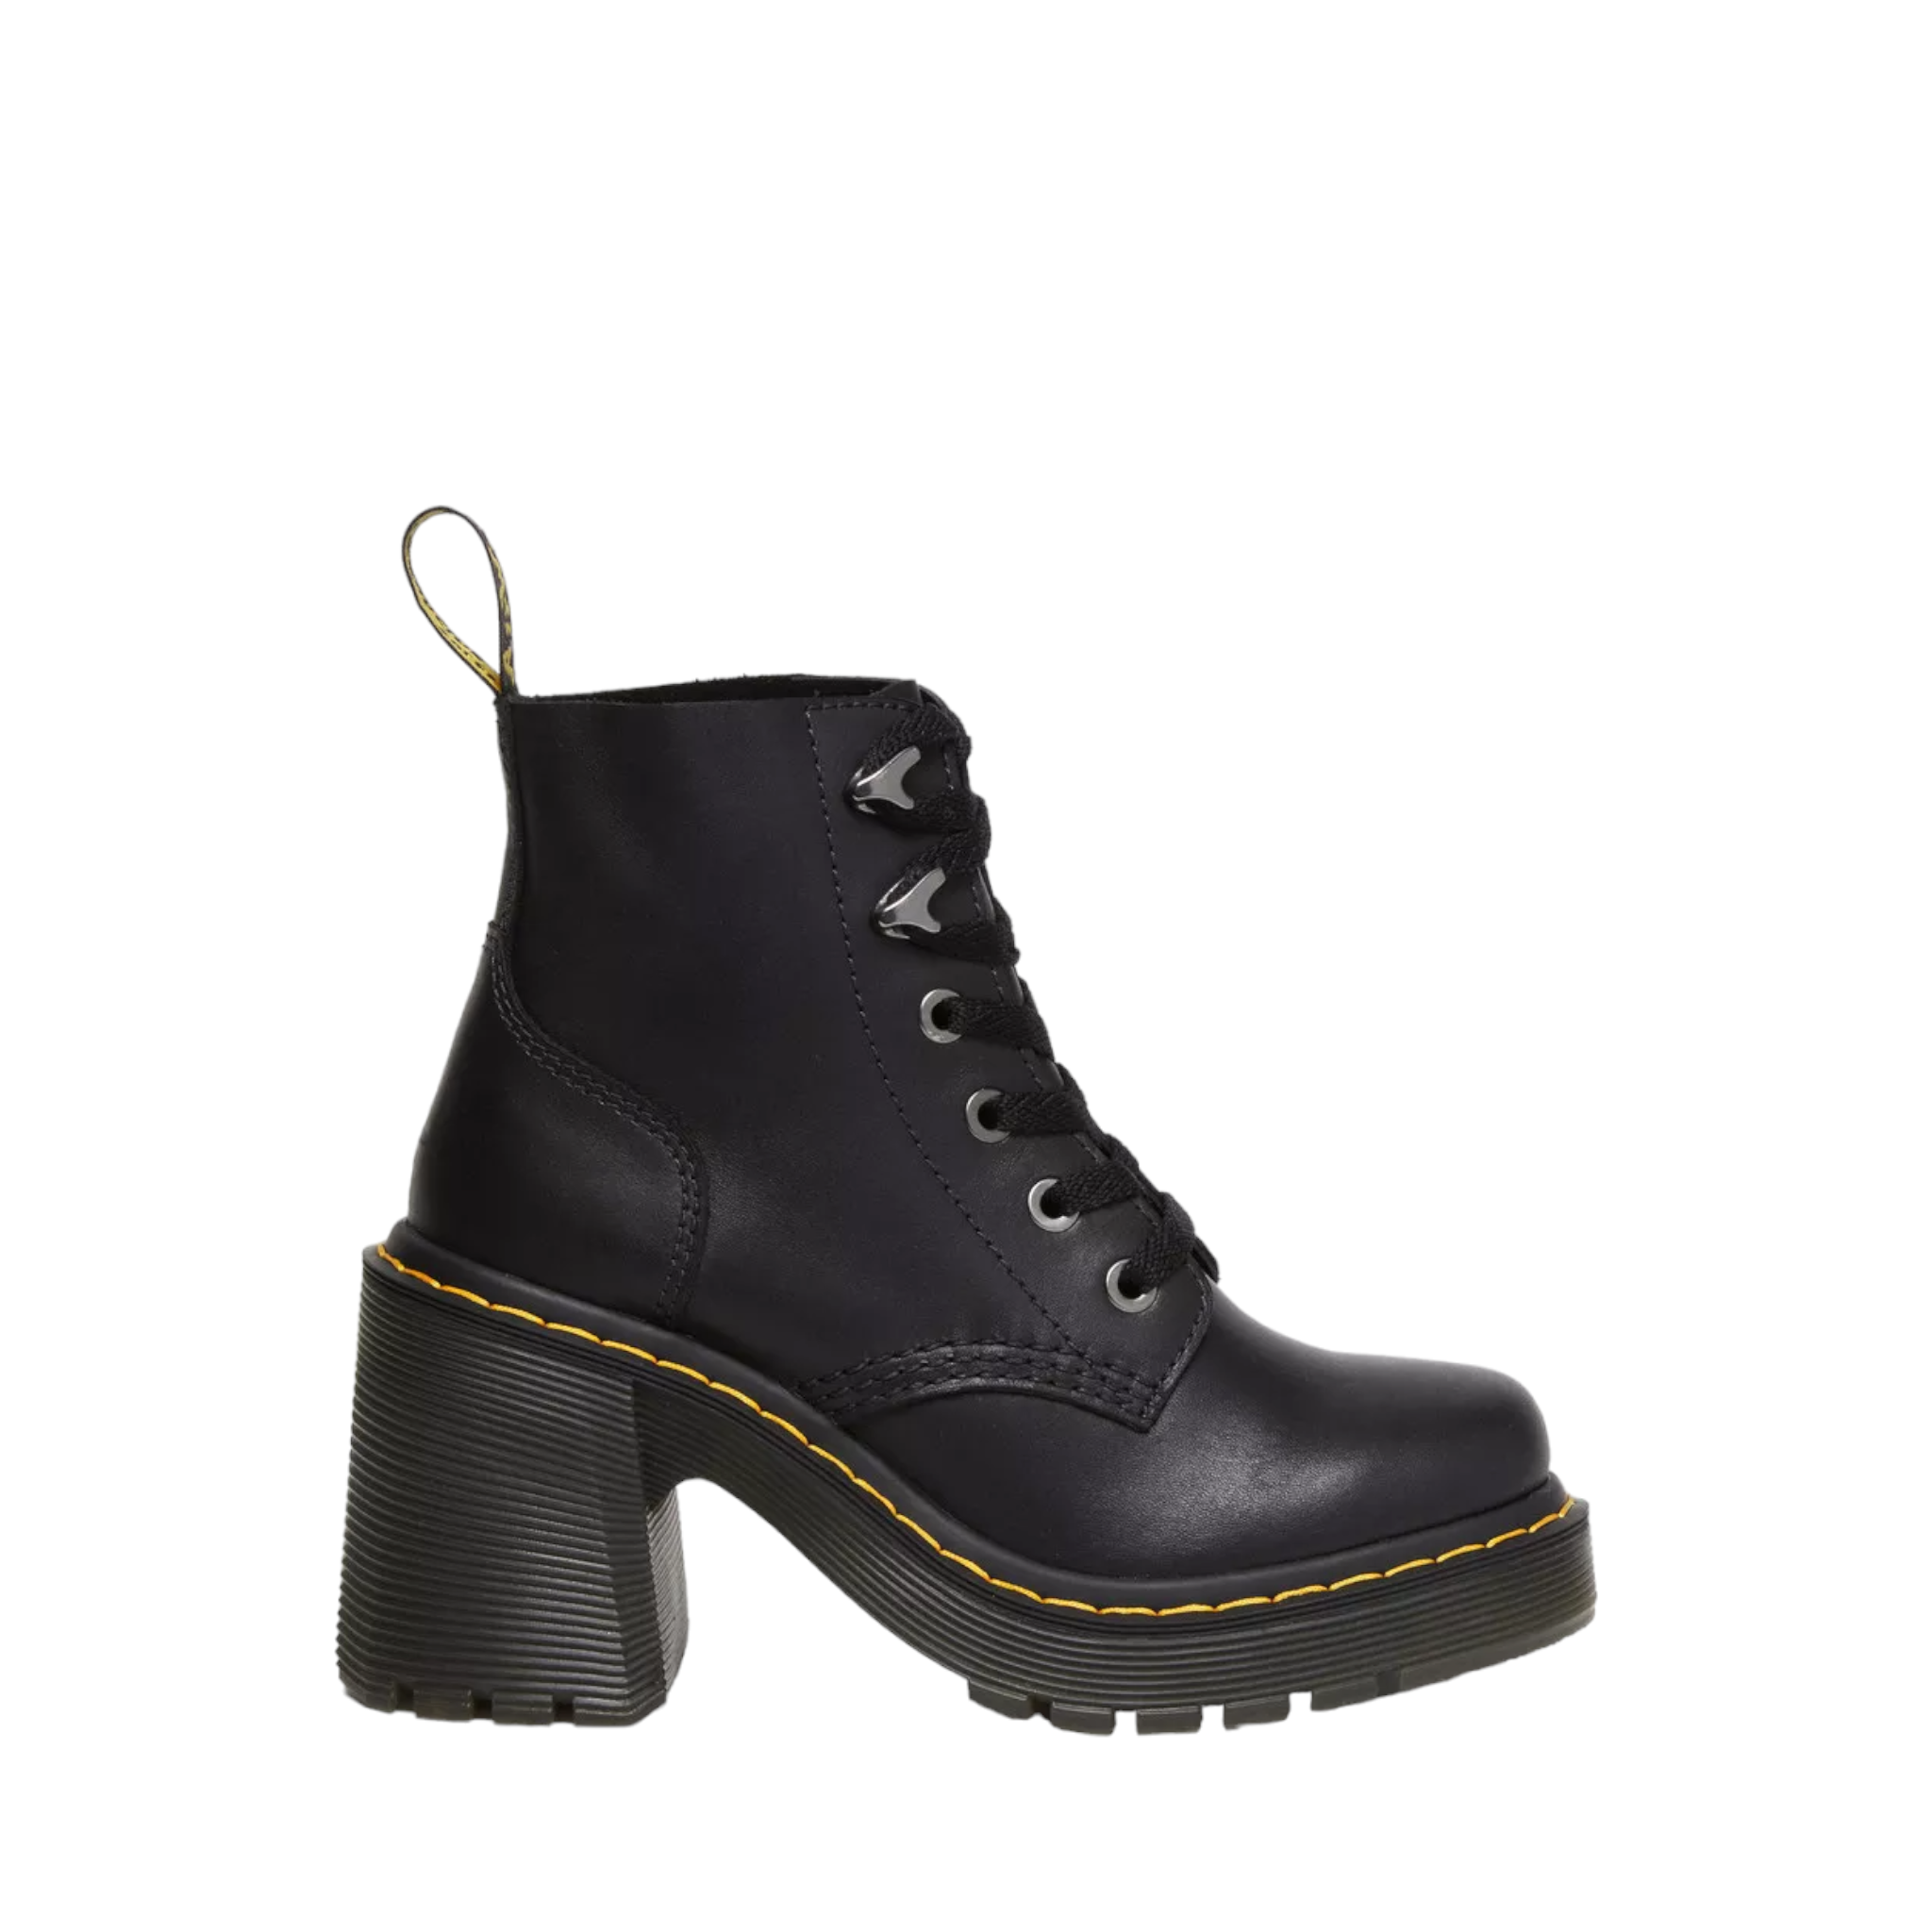 Jesy Dr. Marten Boots with heel and platform sole. Shop Online and in-store with shoe&me Mount Maunganui. Iconic yellow Stitch with unique eyelets and pull-tab.